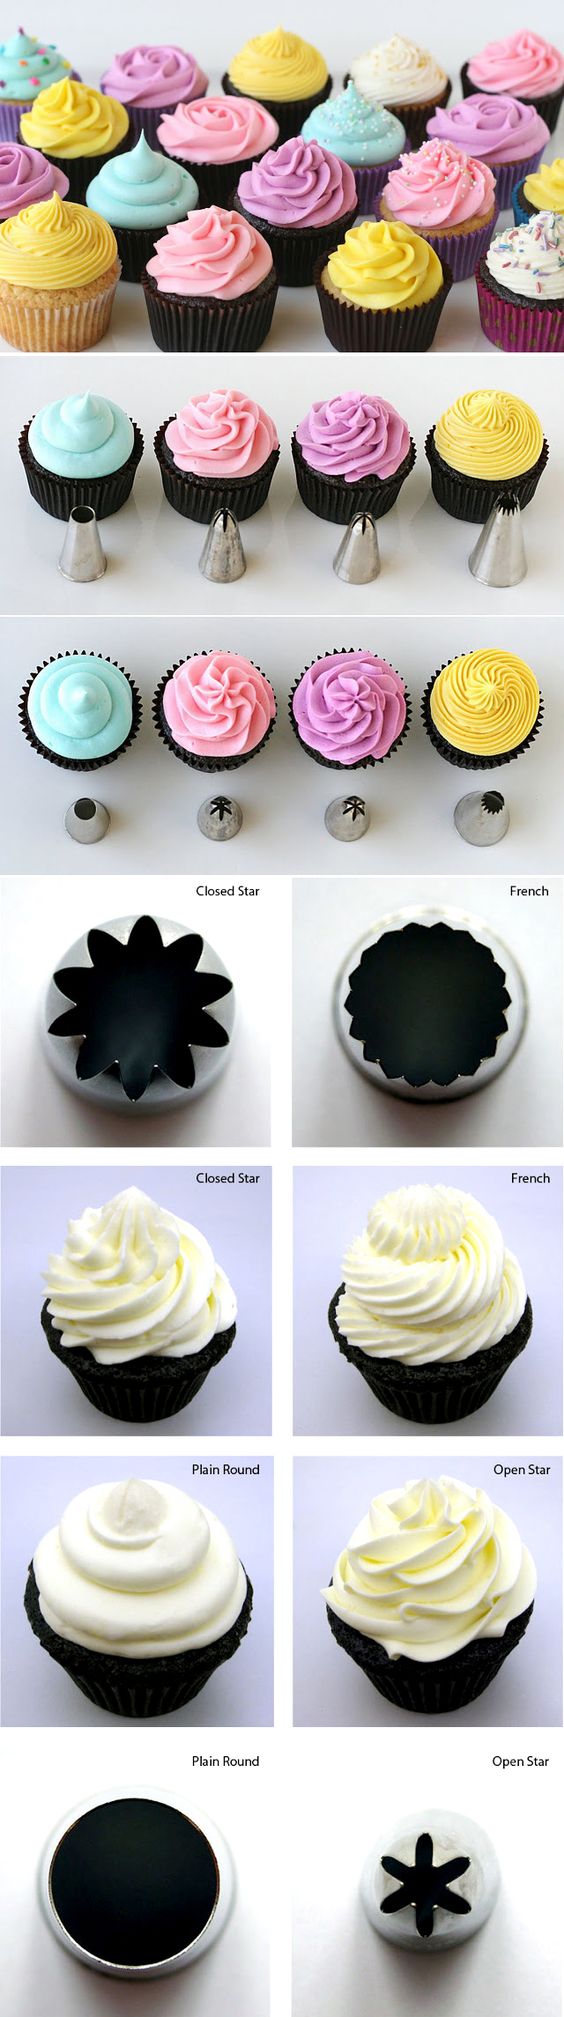 11 Names For Piping Cupcakes Photo - Wilton Cupcake Piping Tips, Cupcake Frosting Ideas and ...